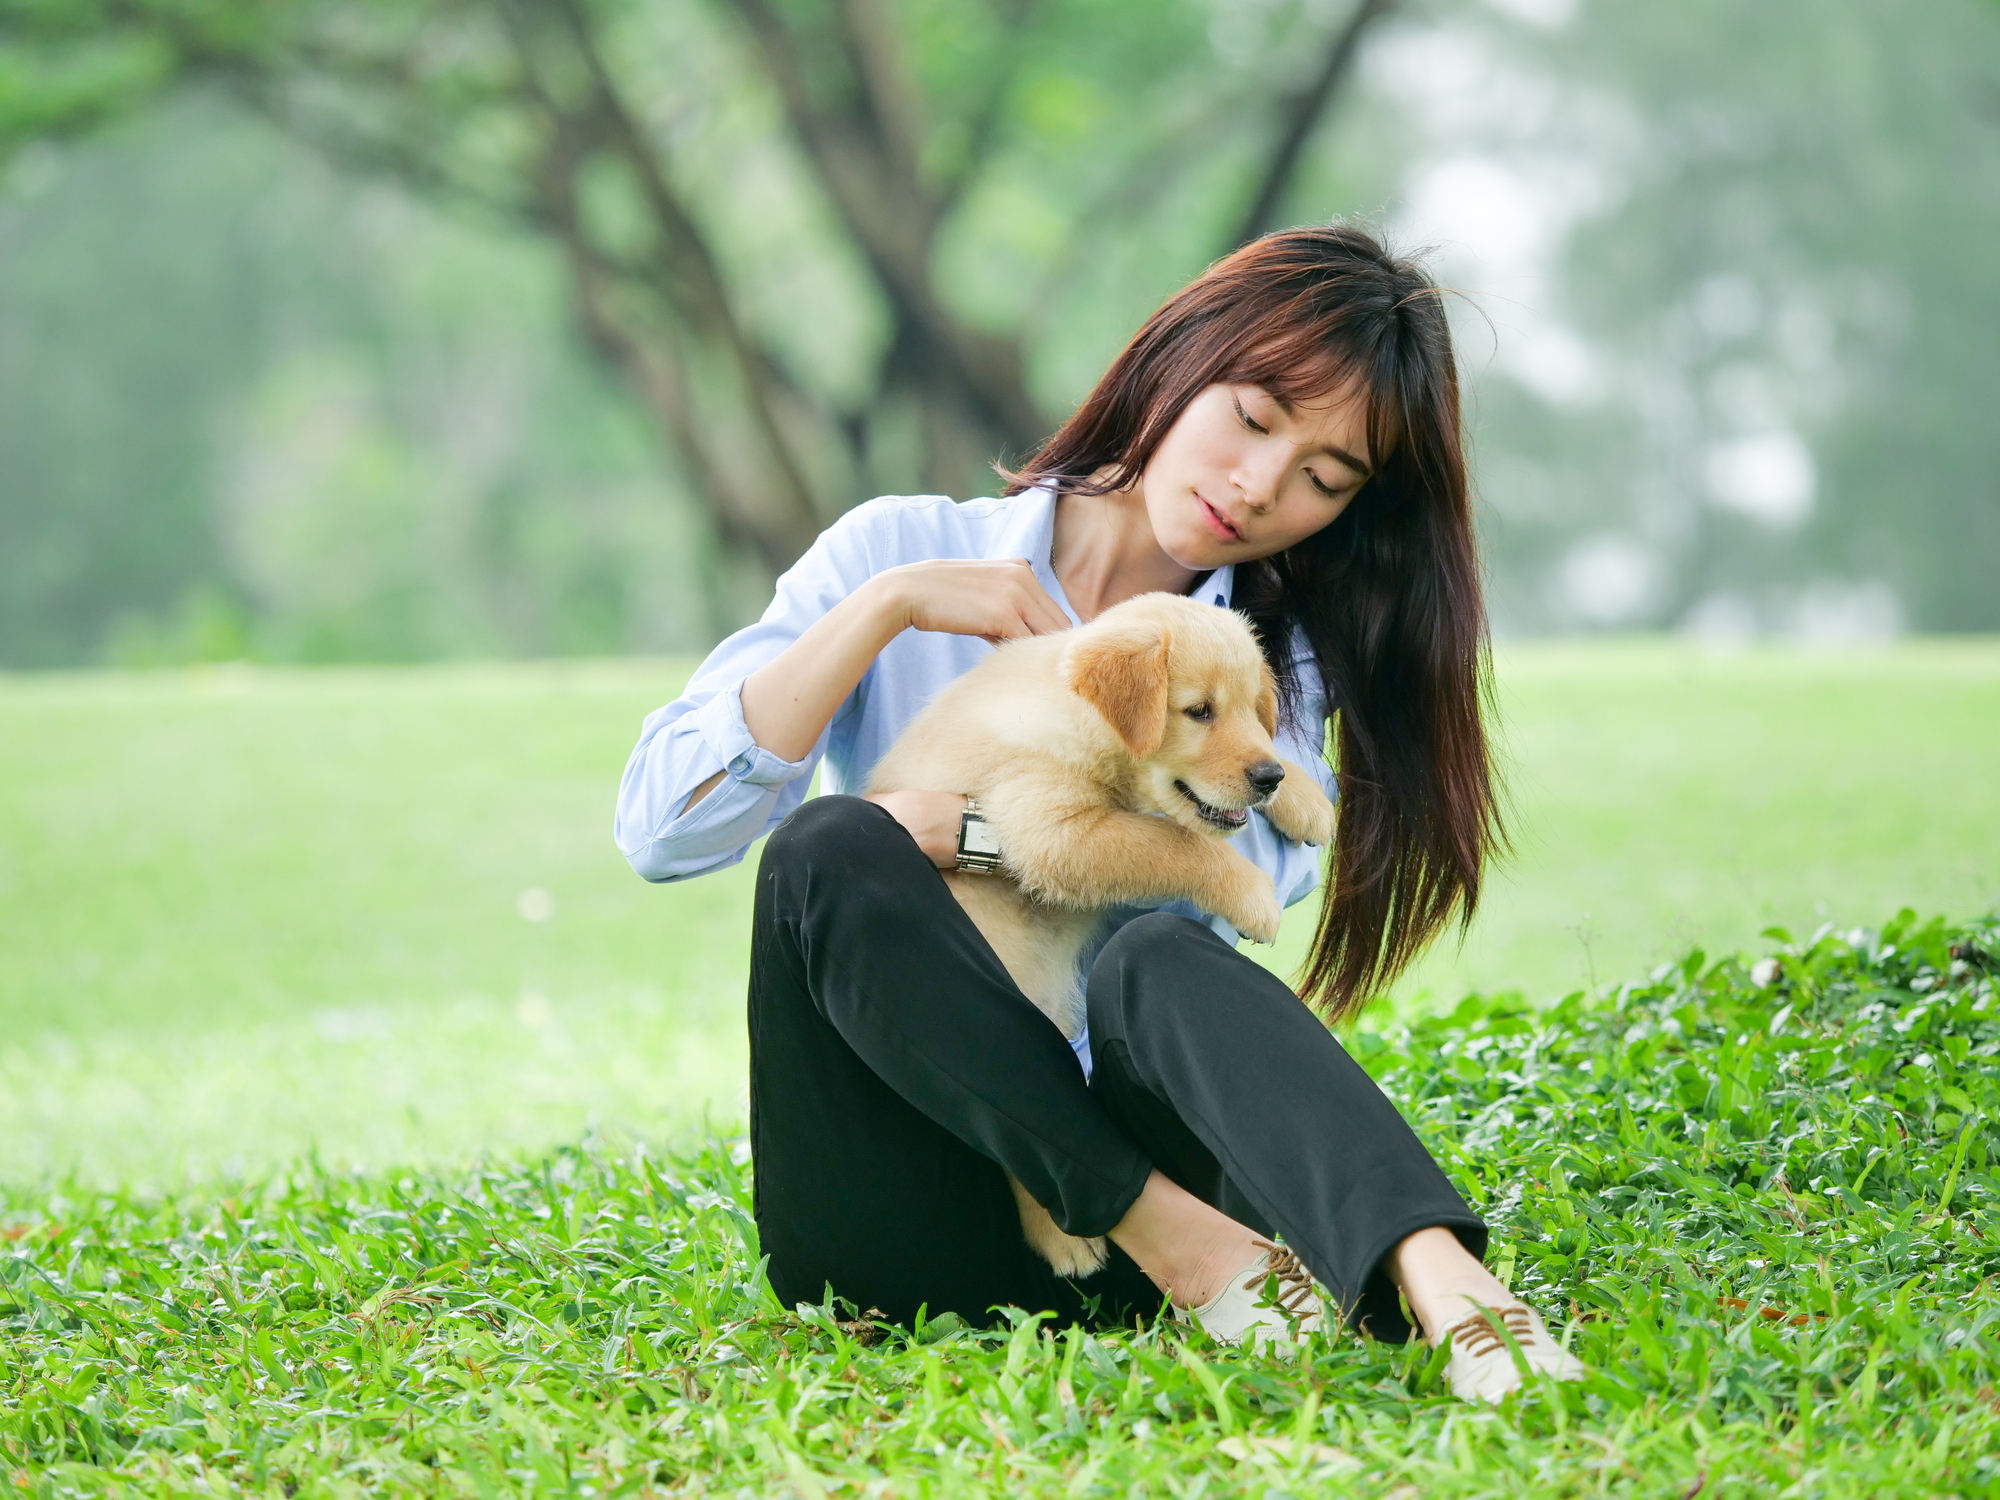 Beautiful young asian woman playing with a cute golden retriever dog in the park.